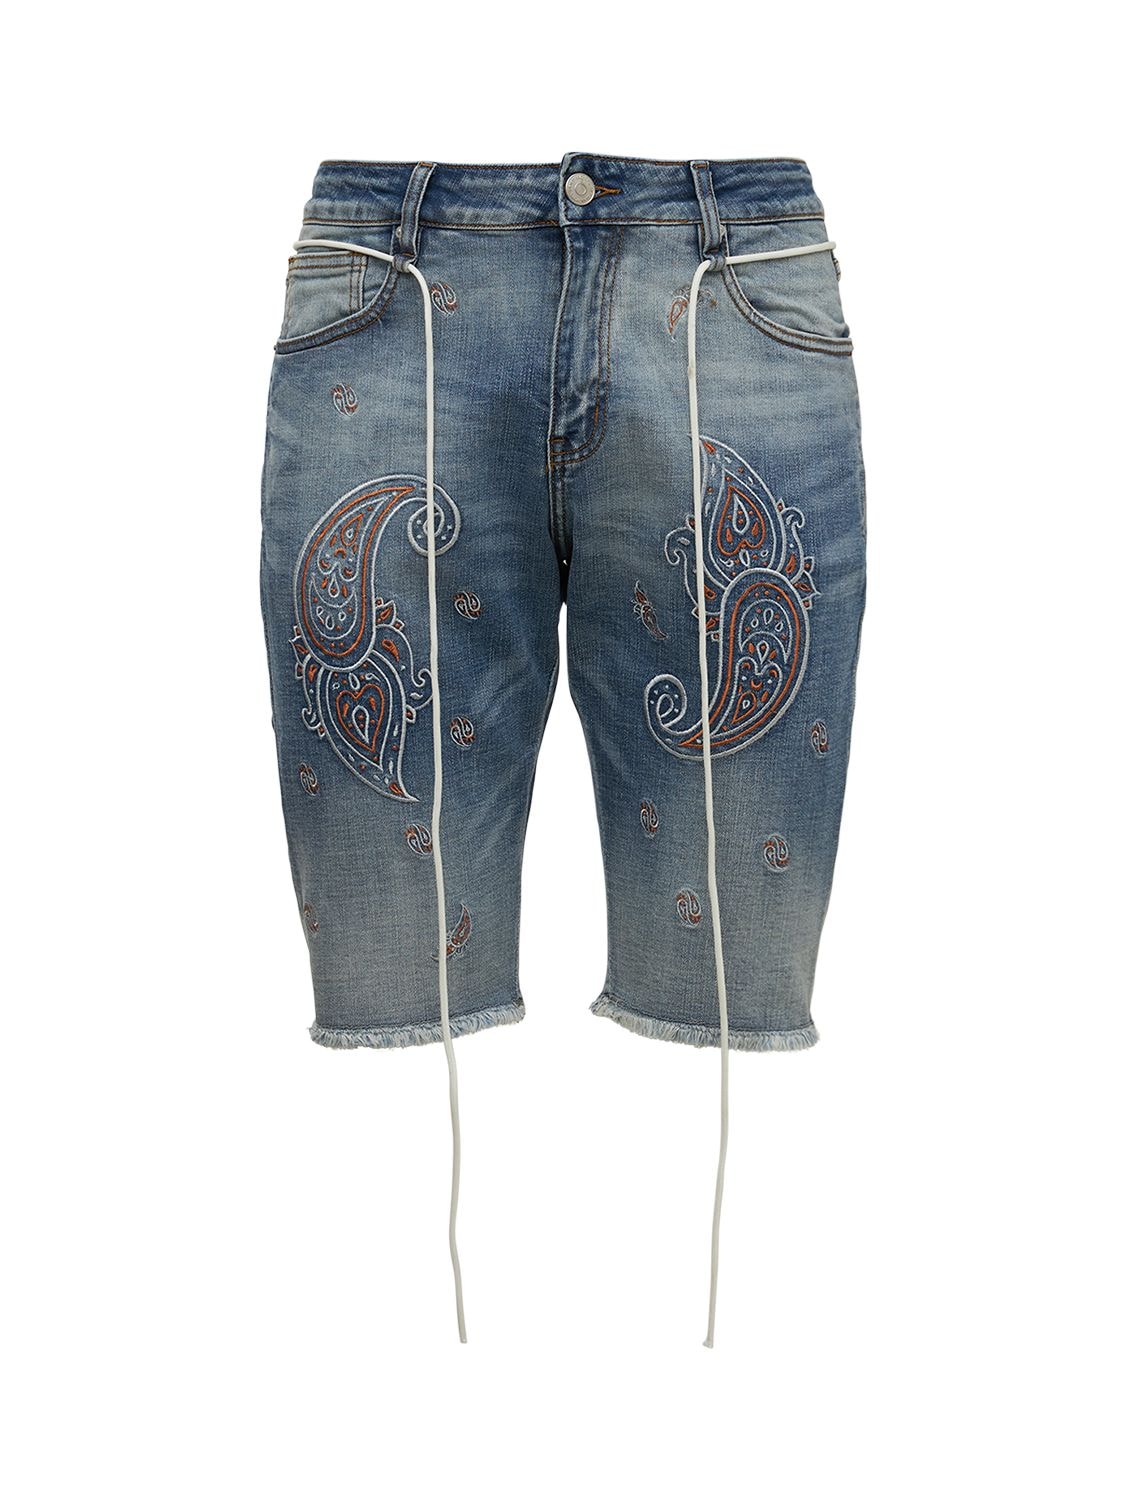 Lifted Anchors Bandana Embroidered Denim Shorts In Blue,multi